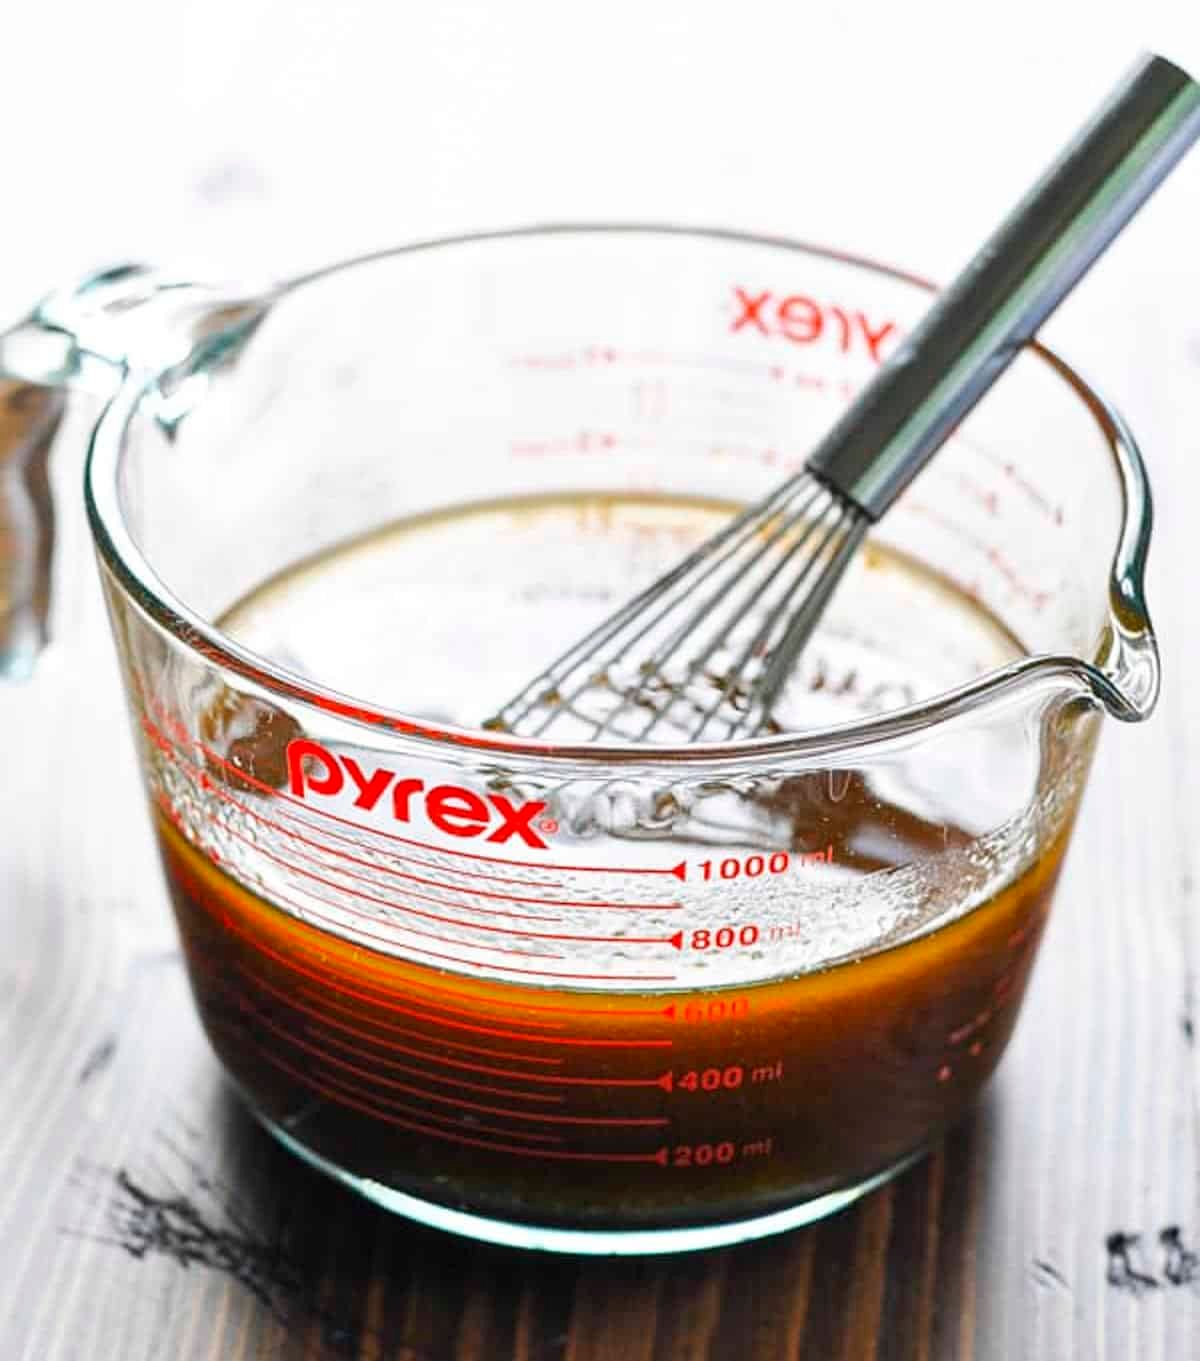 A simple steak marinade for grilling in a glass measuring cup.